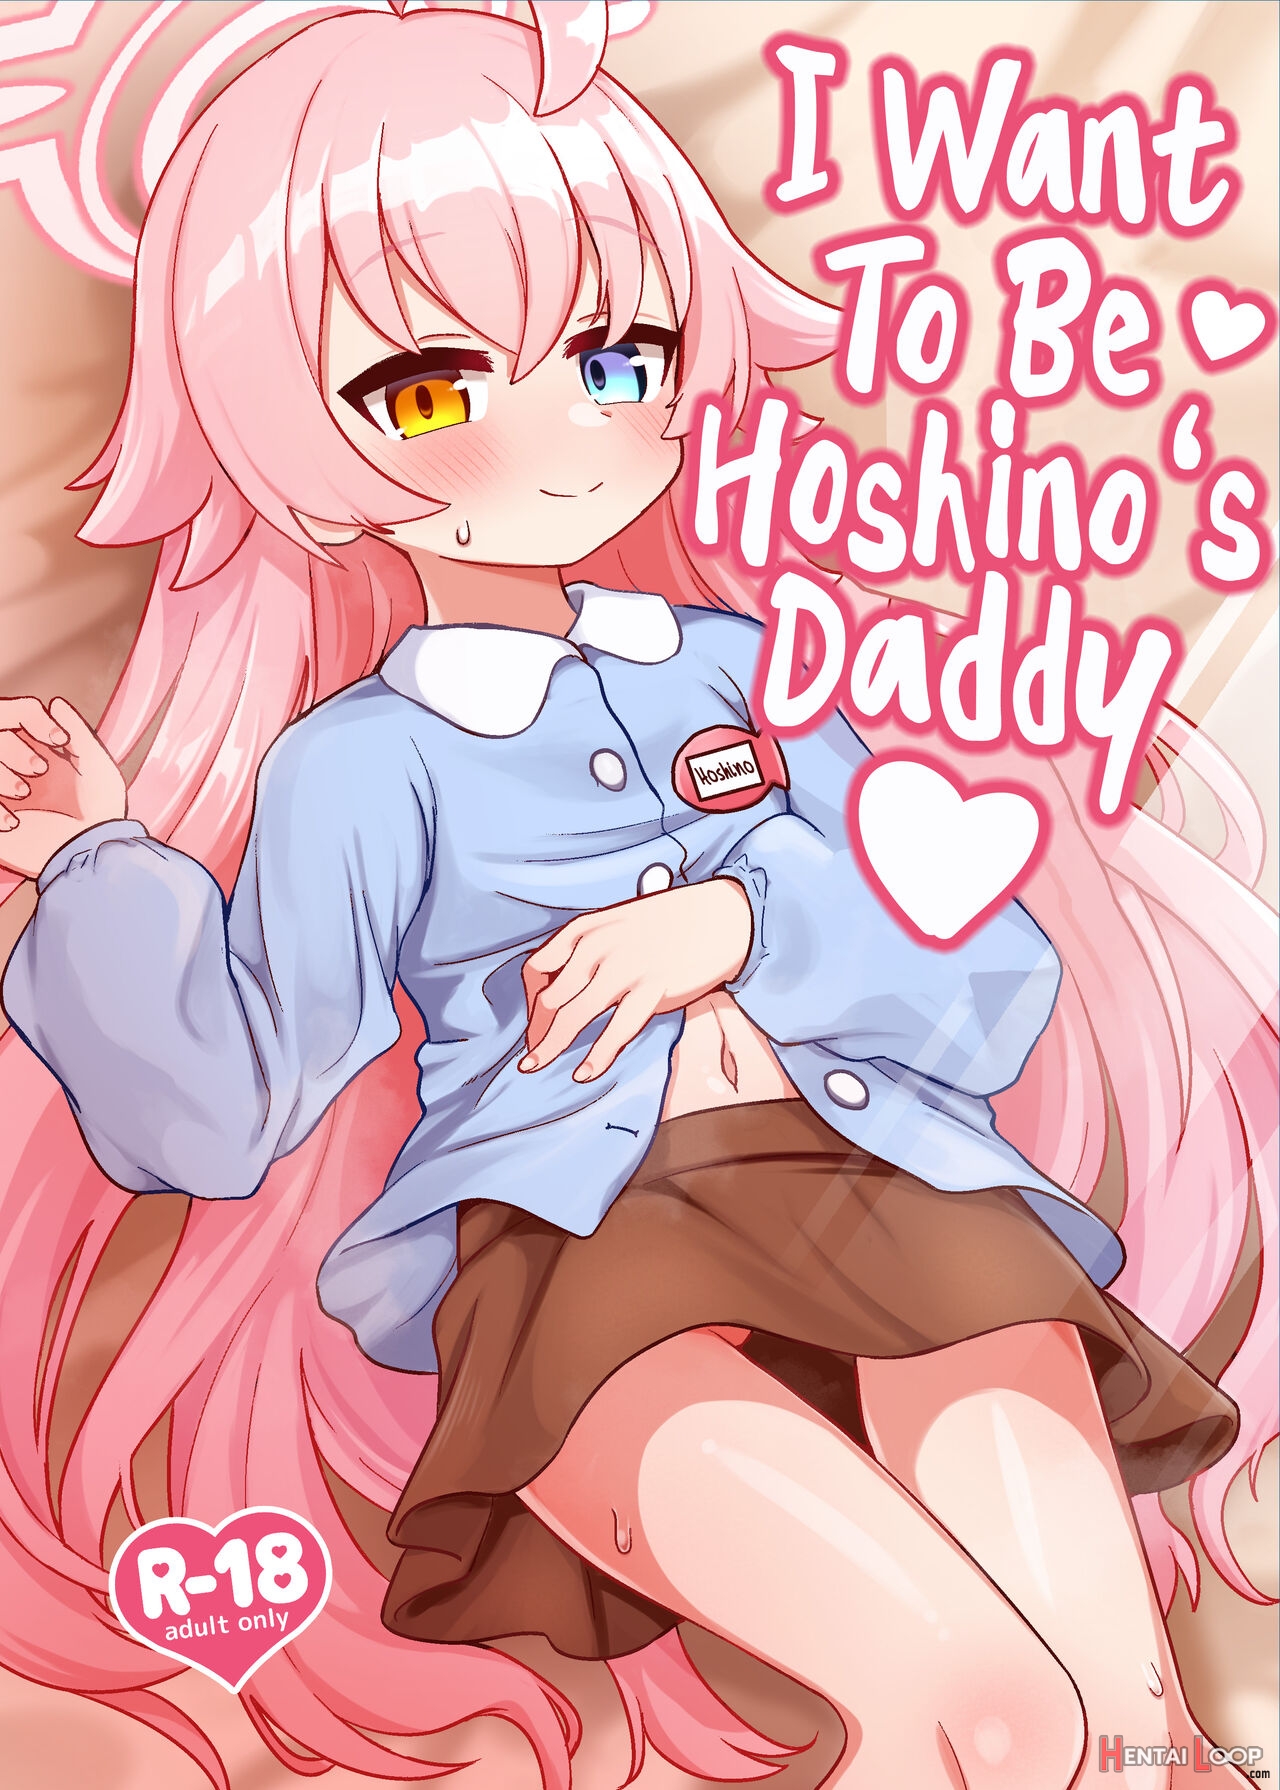 I Want To Be Hoshino's Daddy page 1